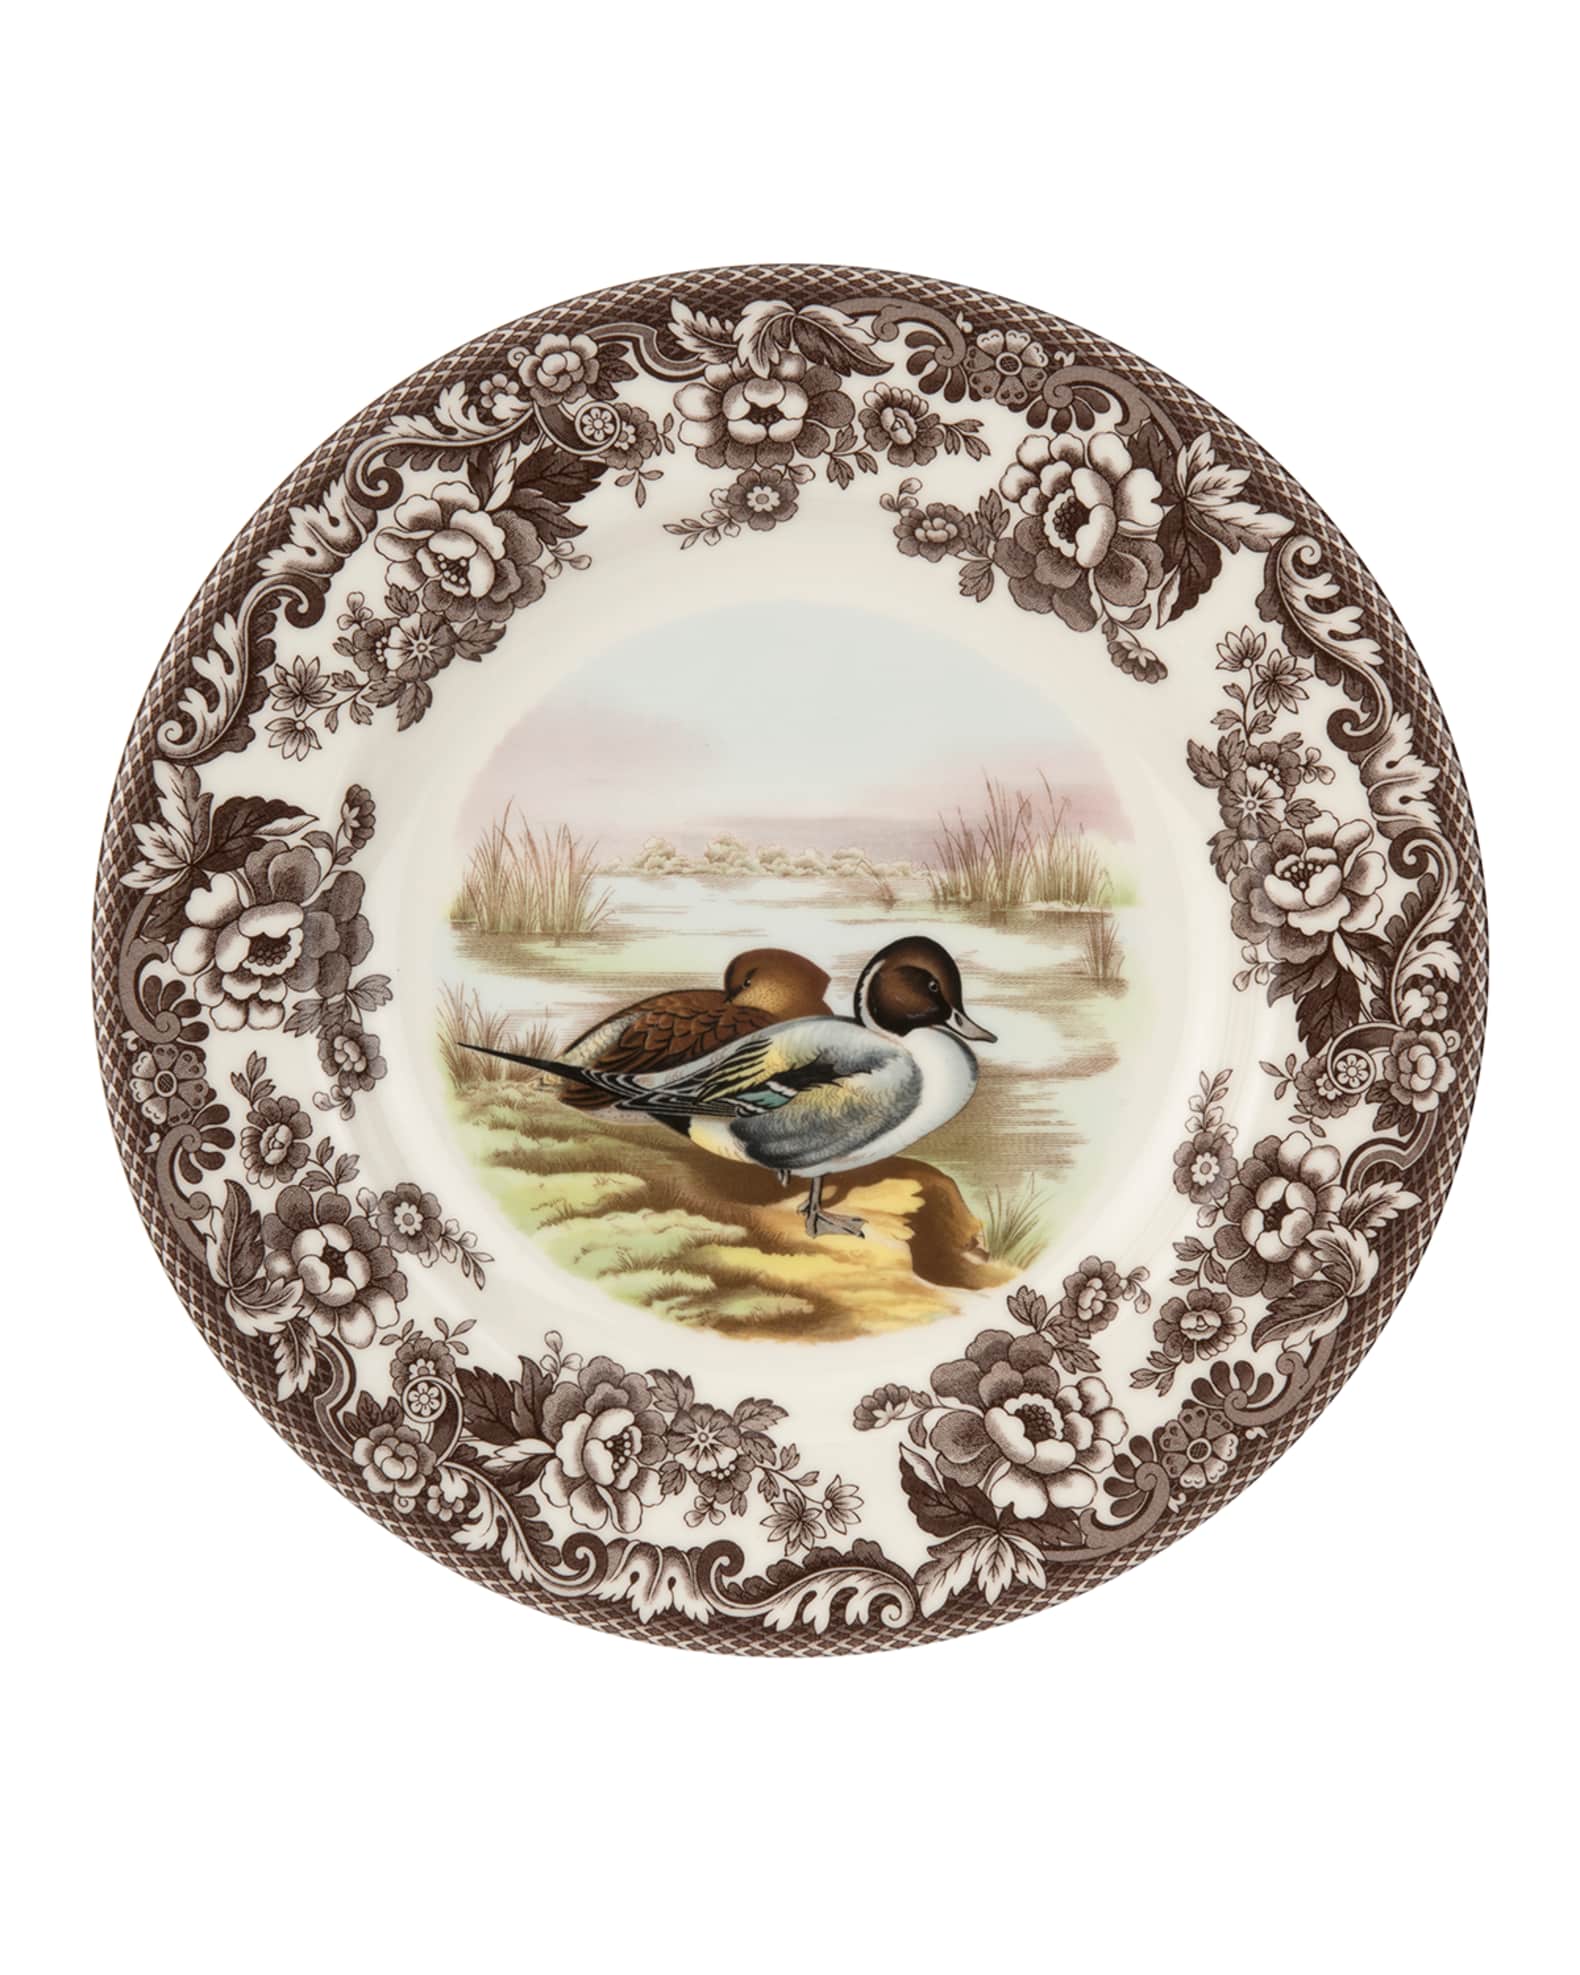 Spode Woodland Pintail Dinner Plate